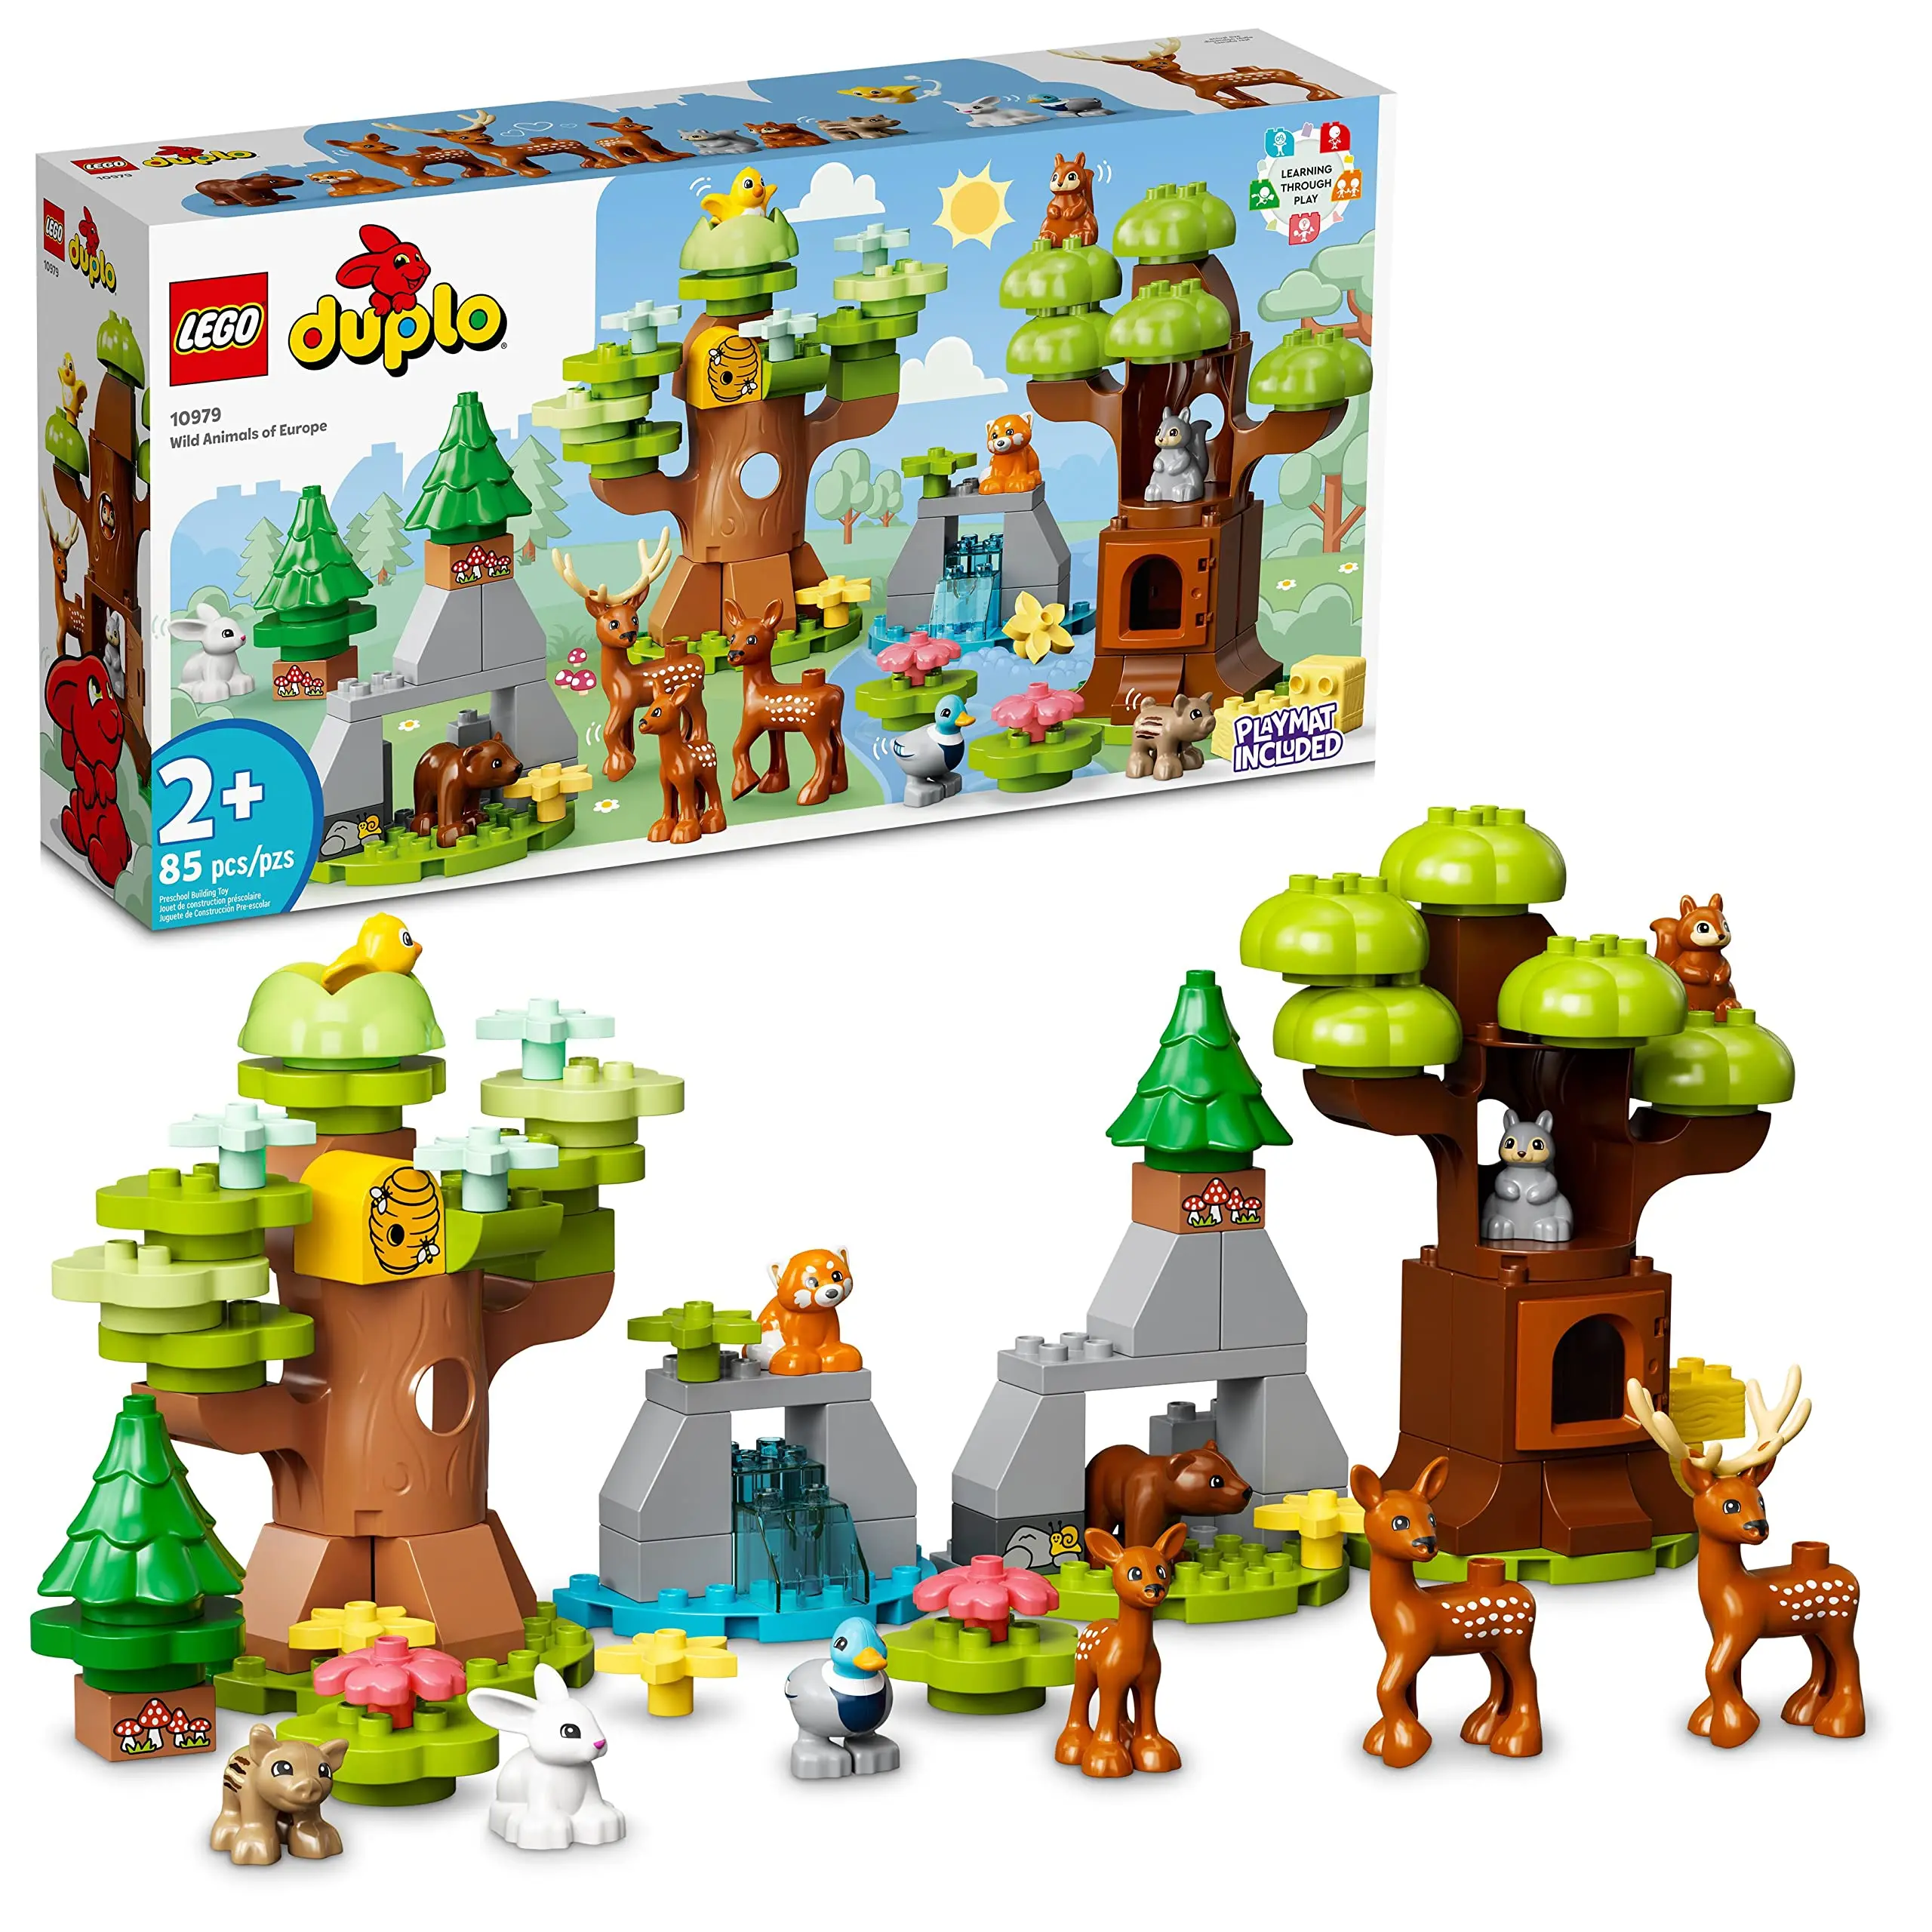 

LEGO DUPLO Wild Animals of Europe 10979, Preschool Learning Toys for Toddlers with Deer, Bear, Fox Forest Animal Figures